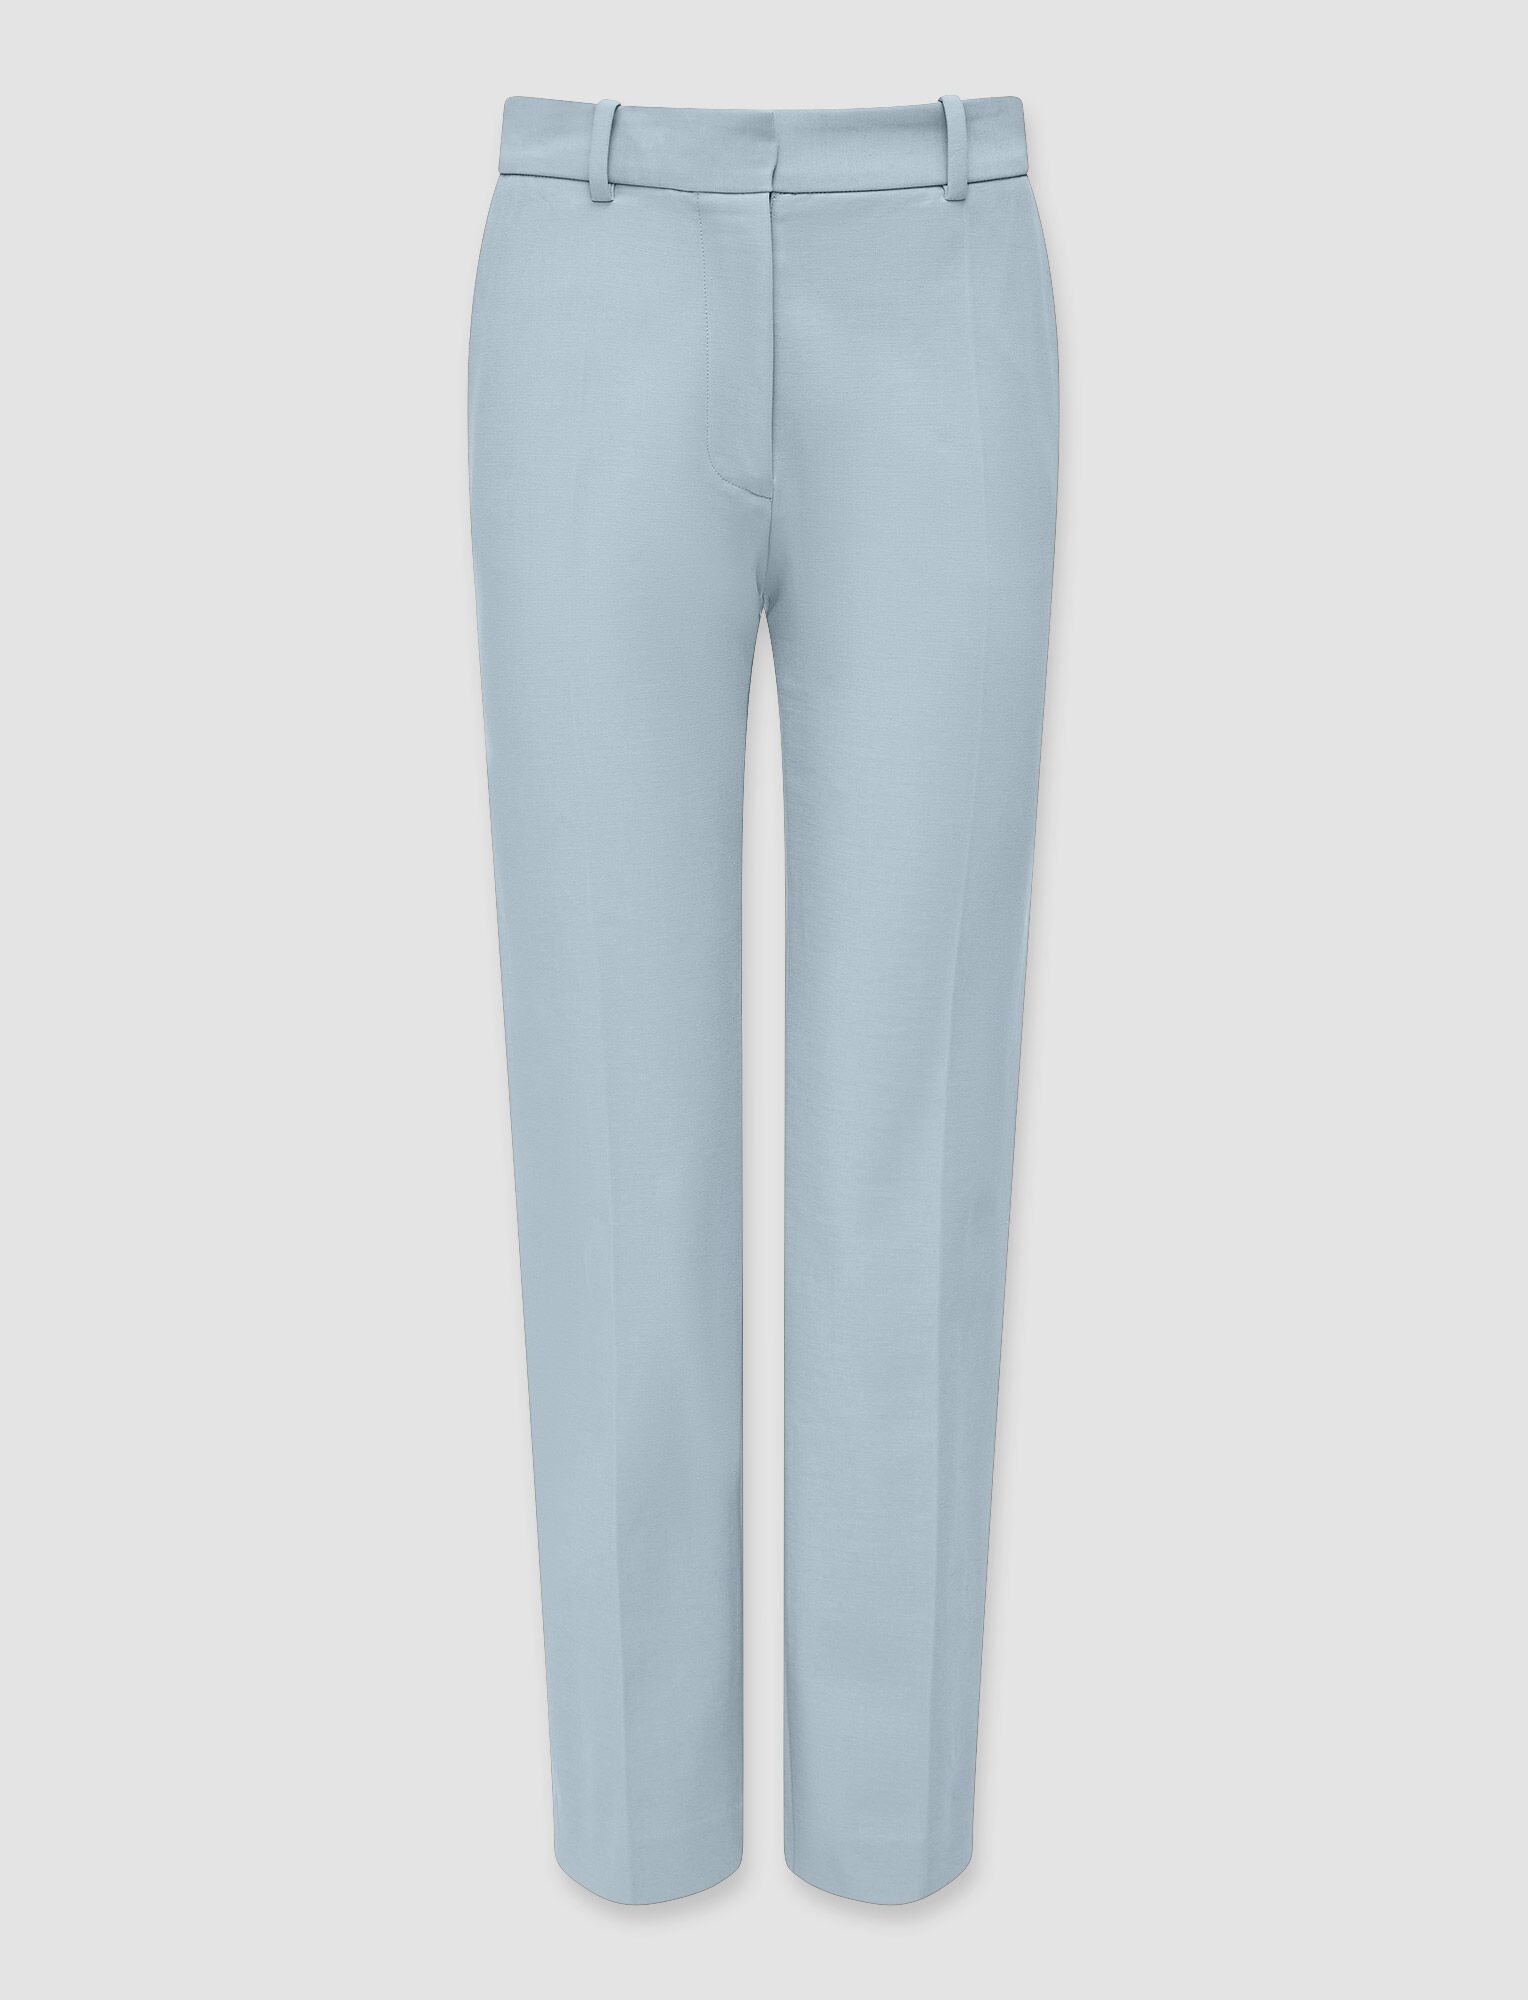 Joseph, Toile Stretch Coleman Trousers, in Dusty Blue